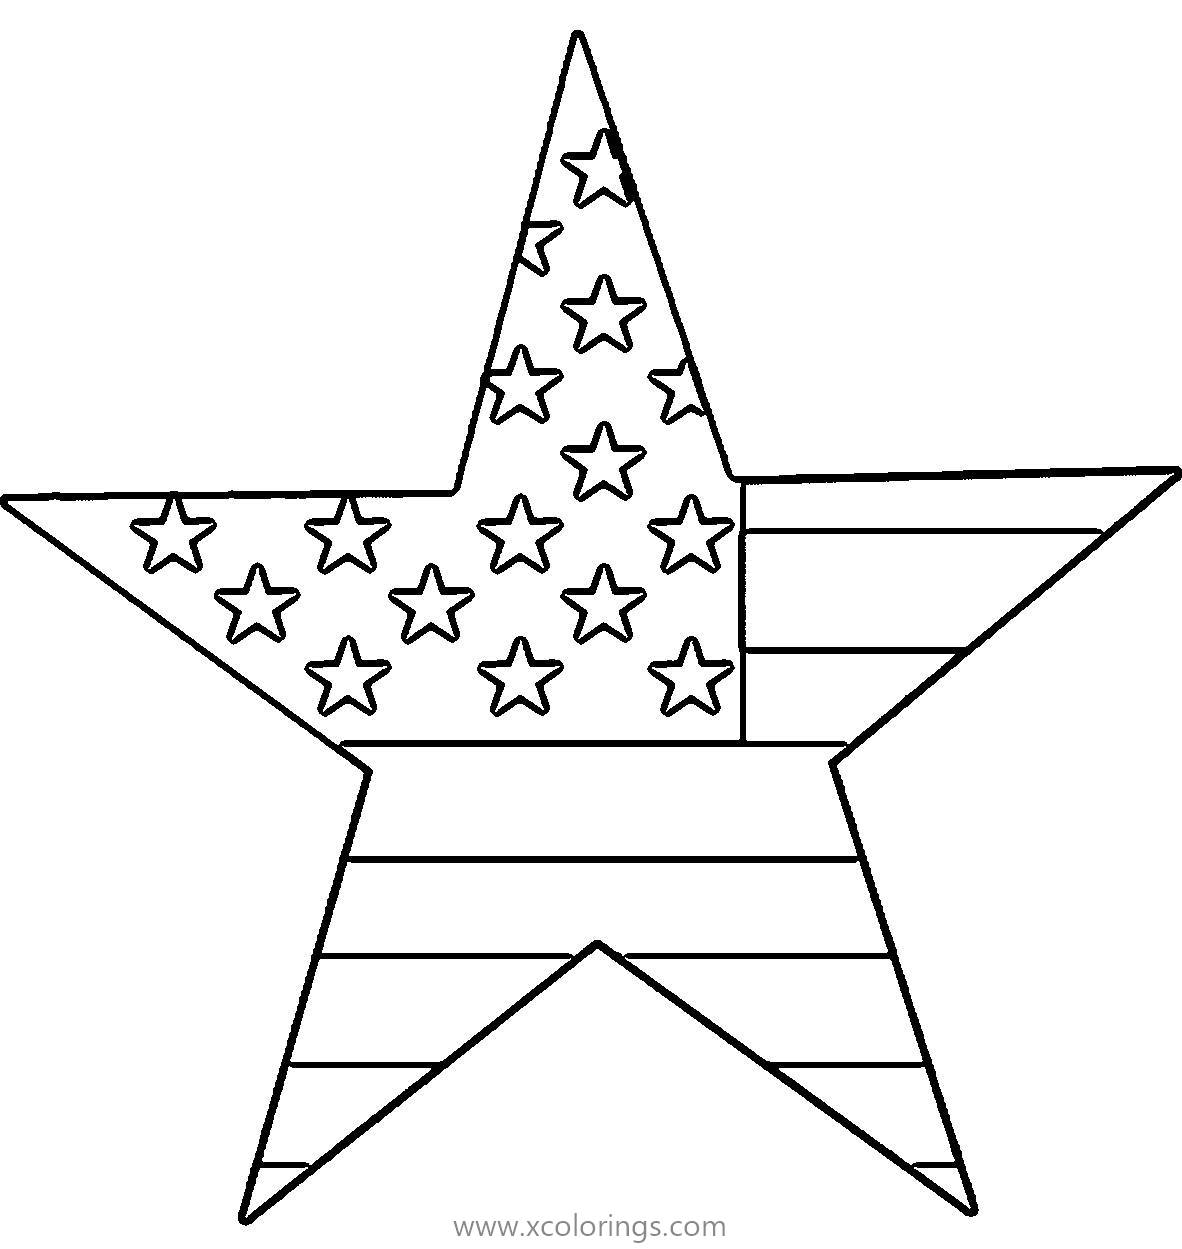 Free 4th of July Star Coloring Pages printable